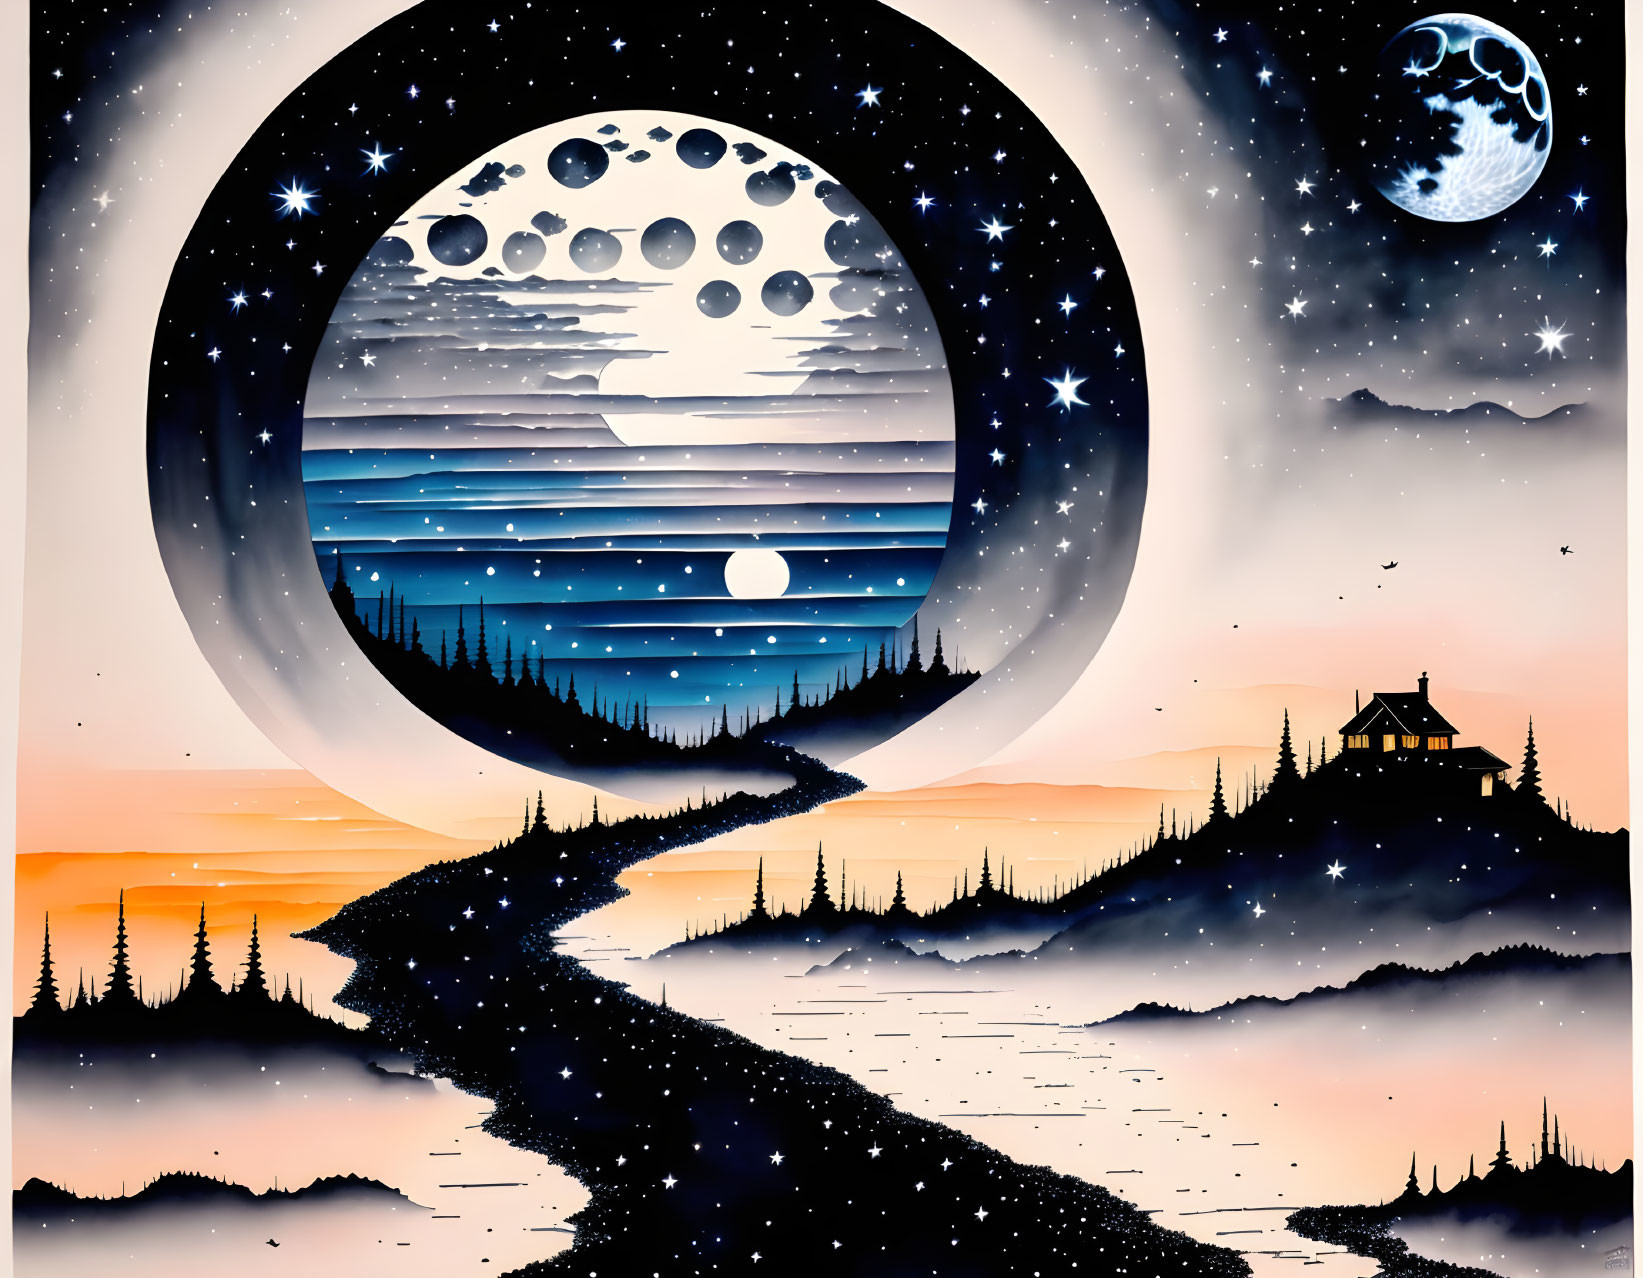 Surreal digital art: oversized moons, starry sky, pine tree silhouettes, solitary